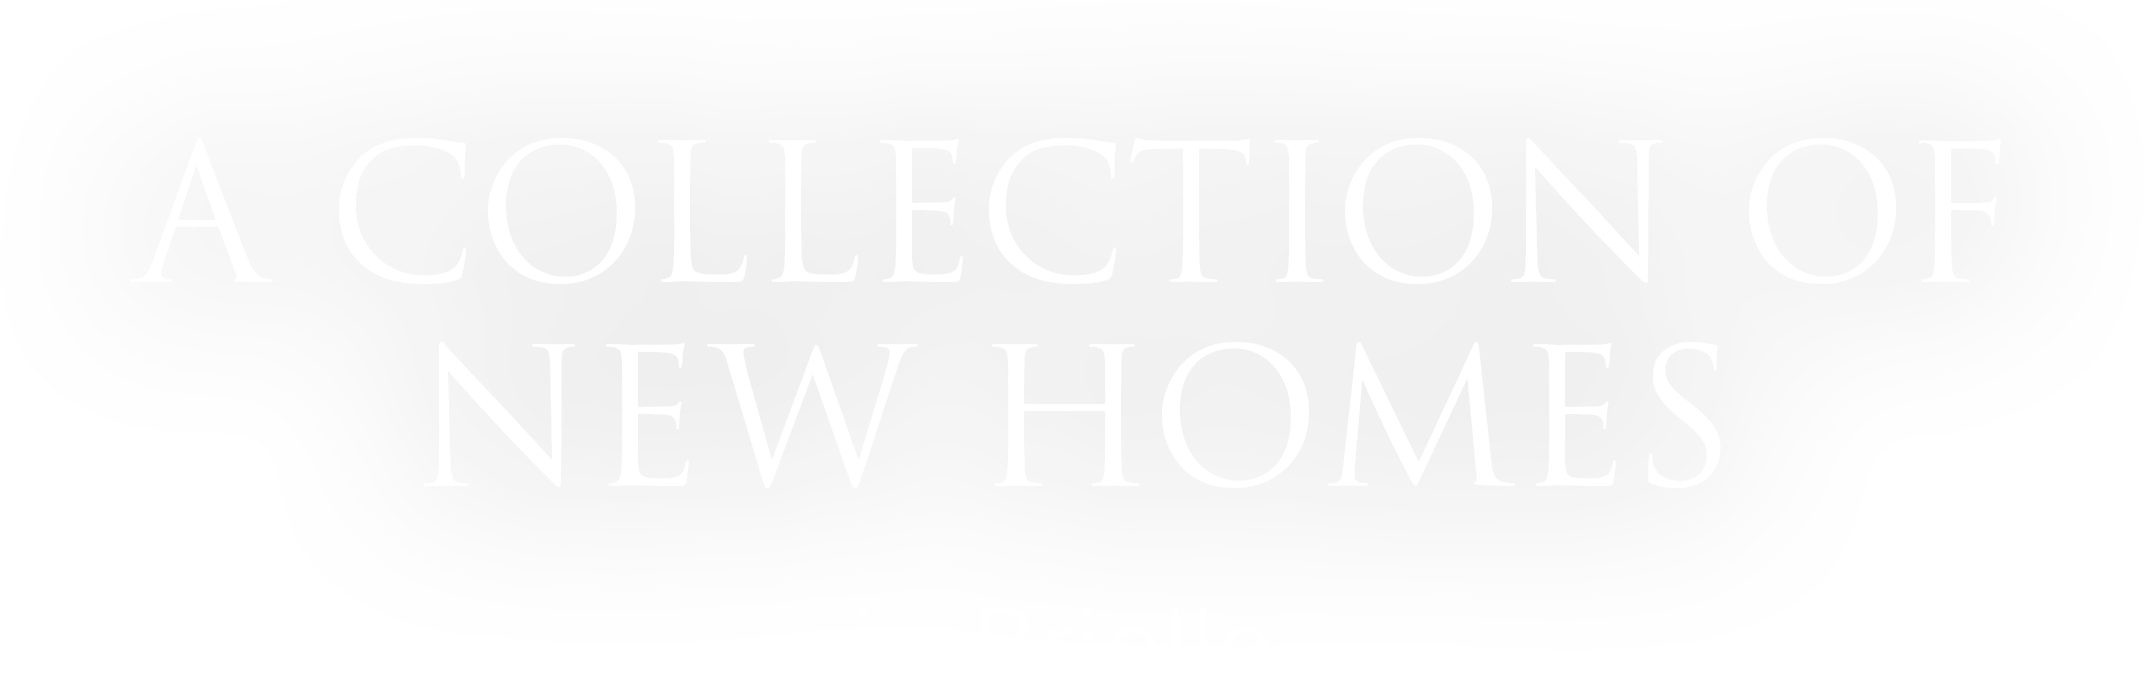 A Collection of New Homes in Brielle